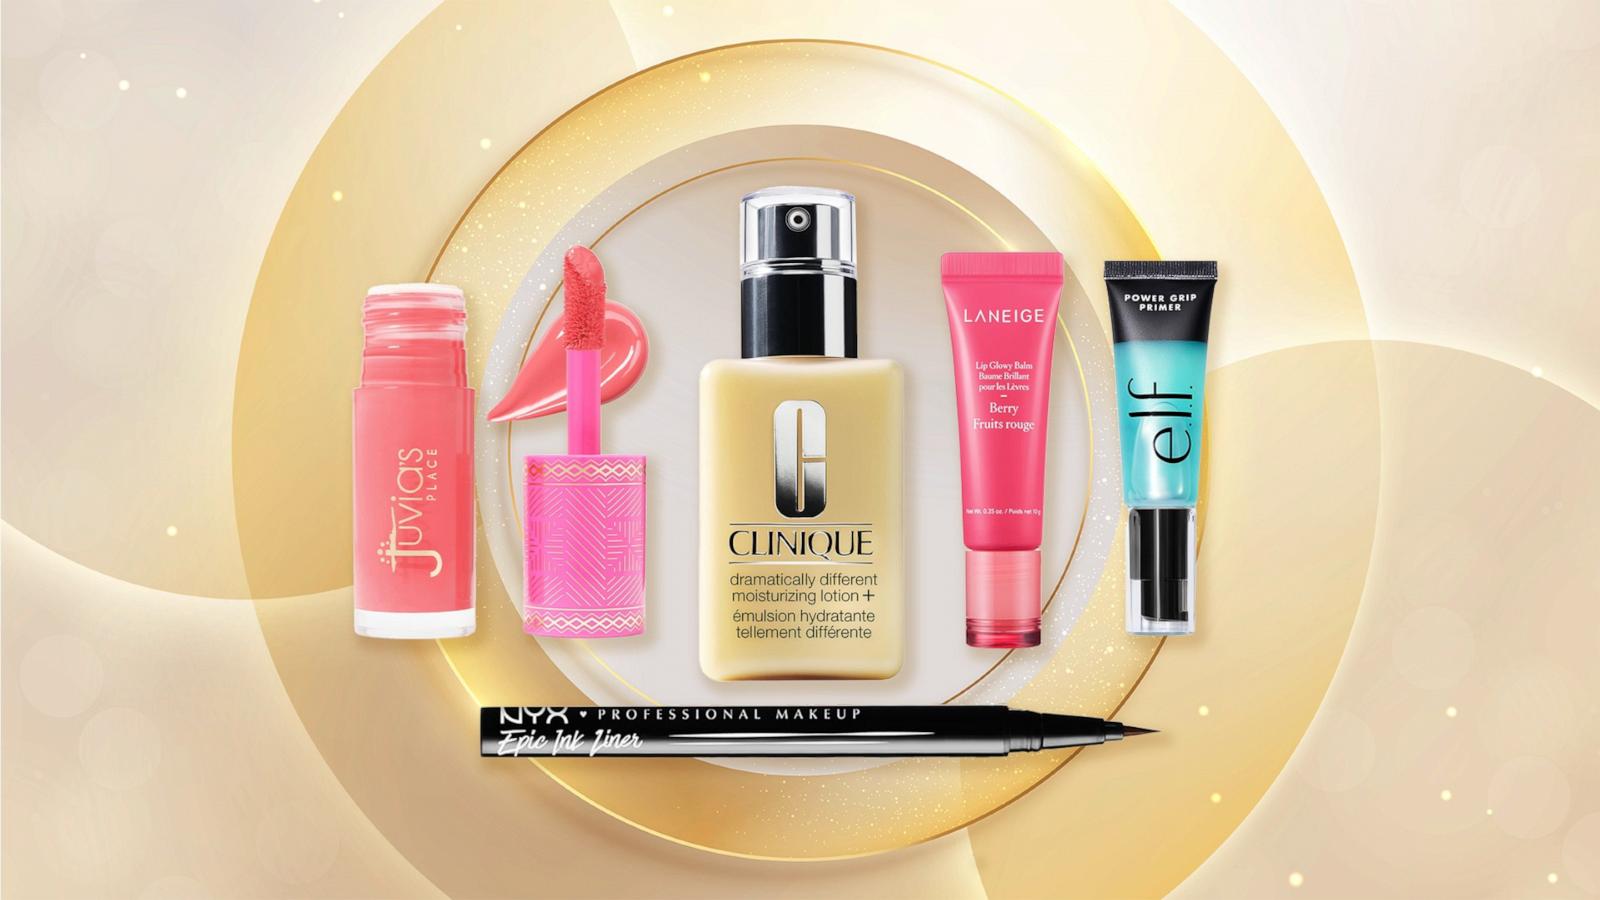 Shop Amazon's Summer Beauty Haul to save on best-selling makeup, skincare and more